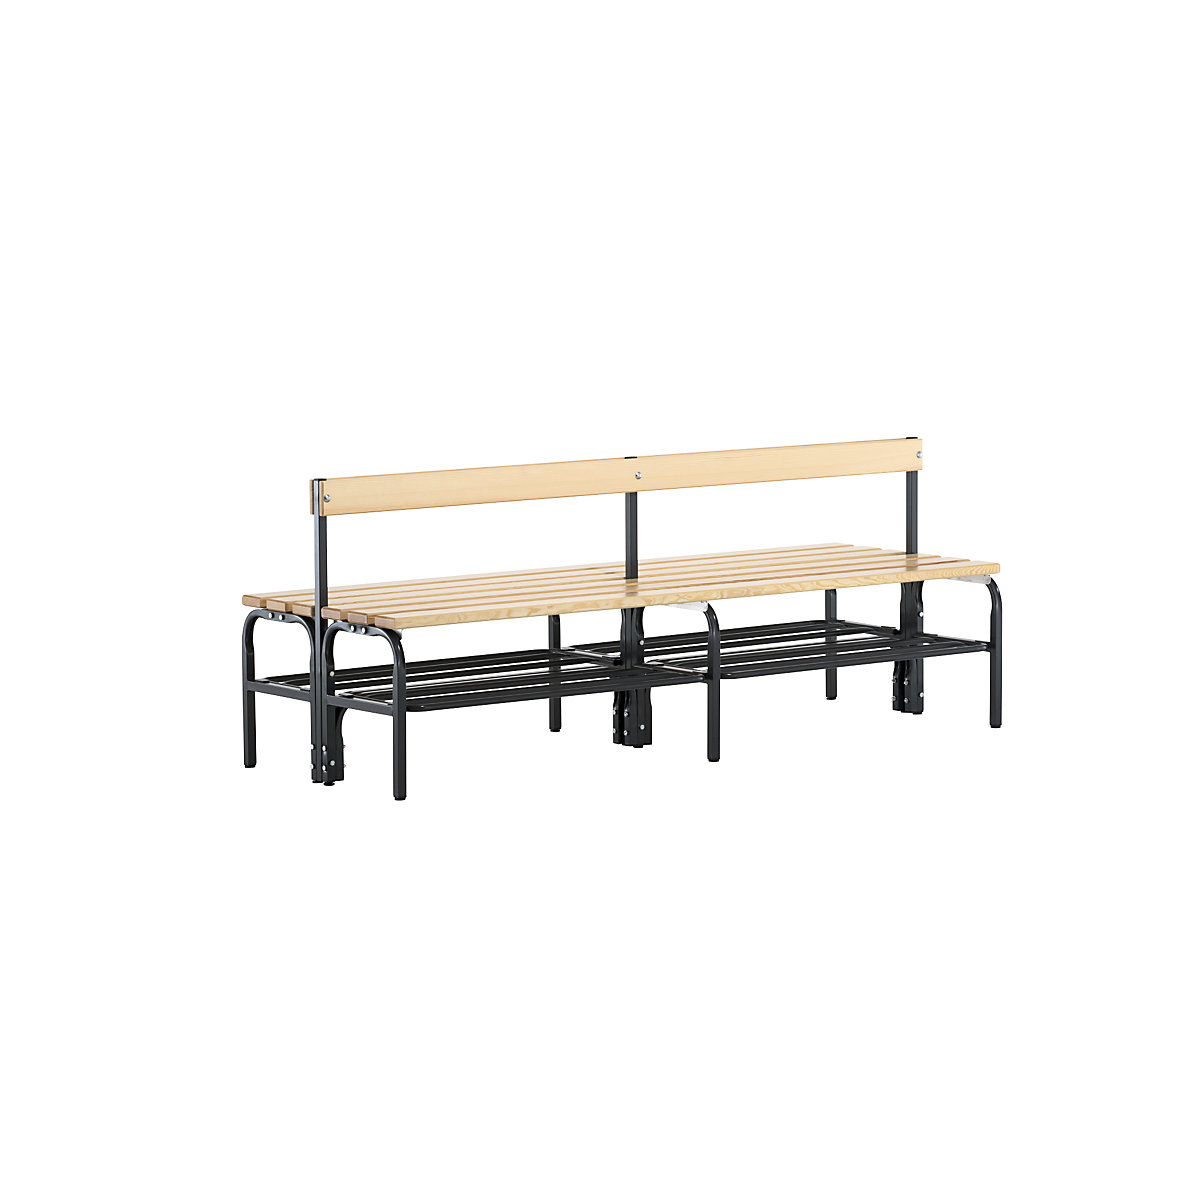 Half height cloakroom bench with back rest, double sided – Sypro, pine wood slats, length 1500 mm, charcoal, shoe rack-4